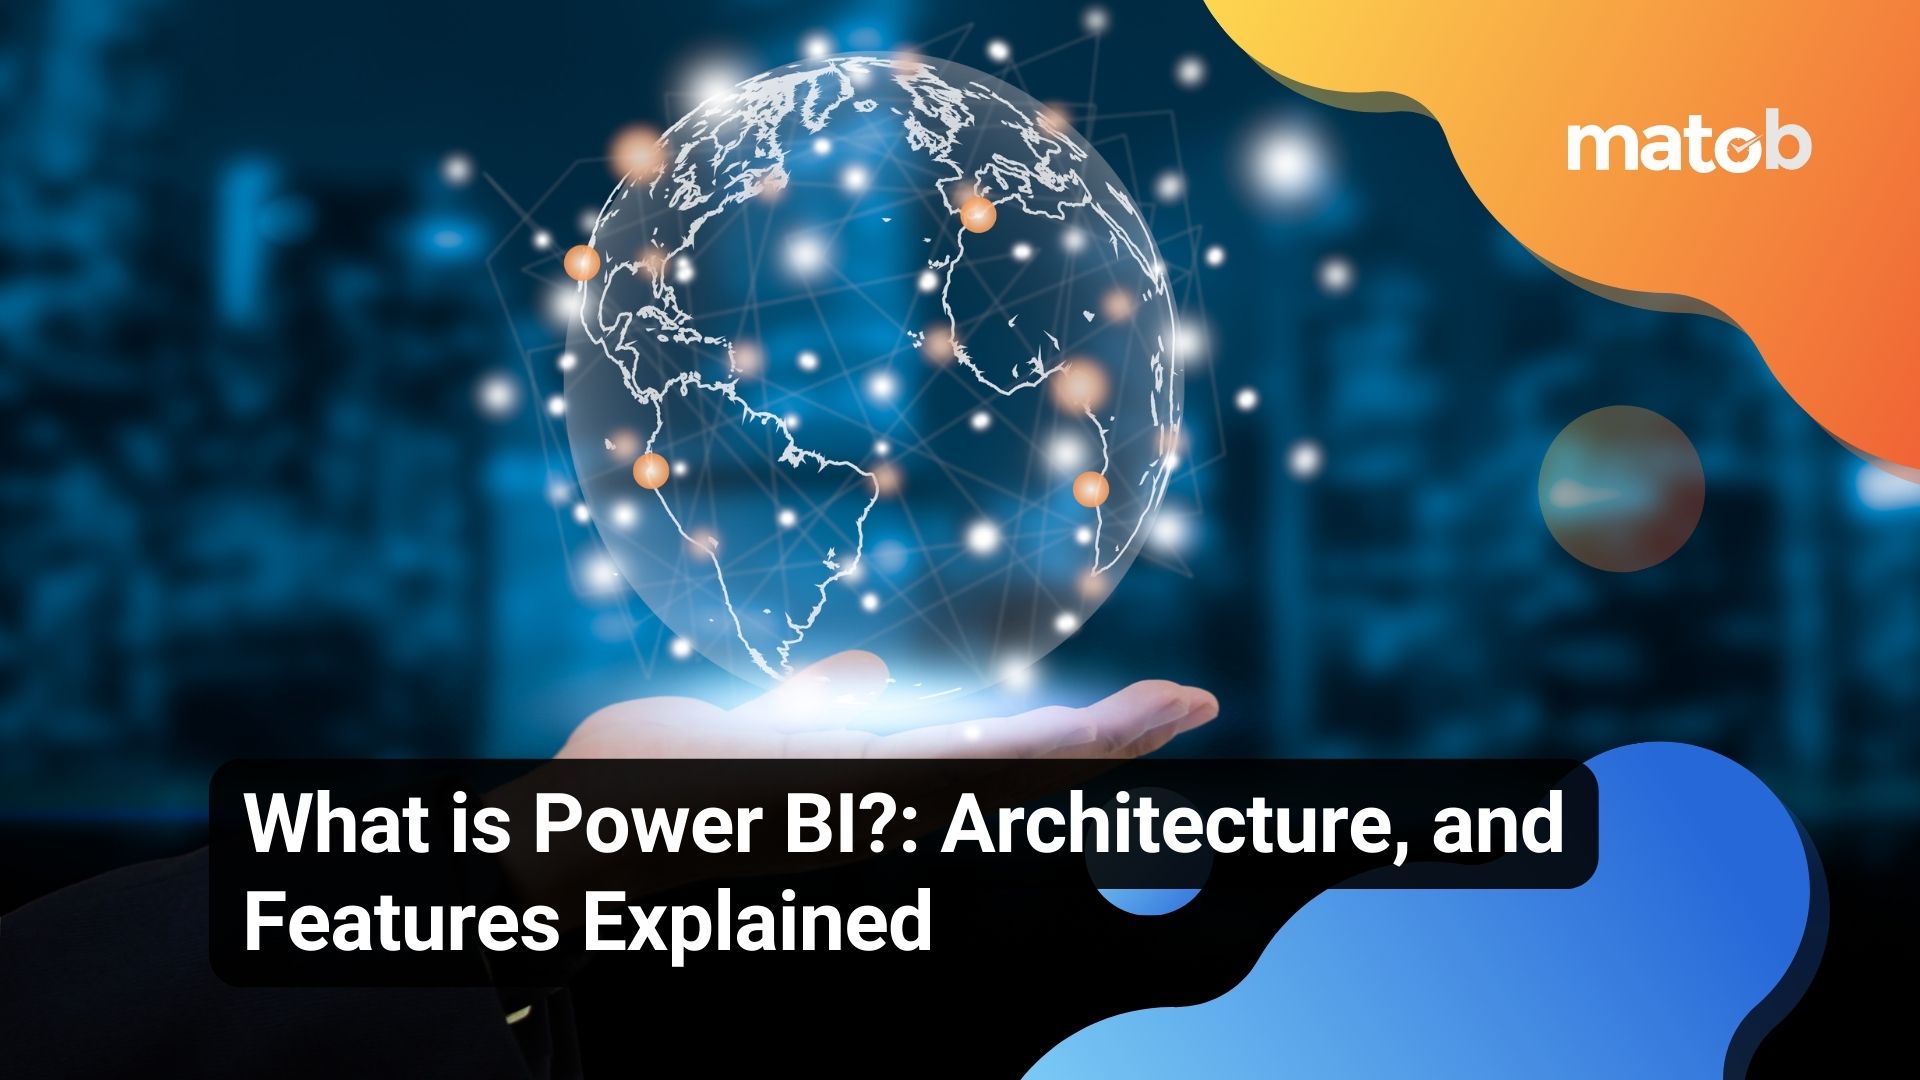 What is Power BI?: Architecture, and Features Explained